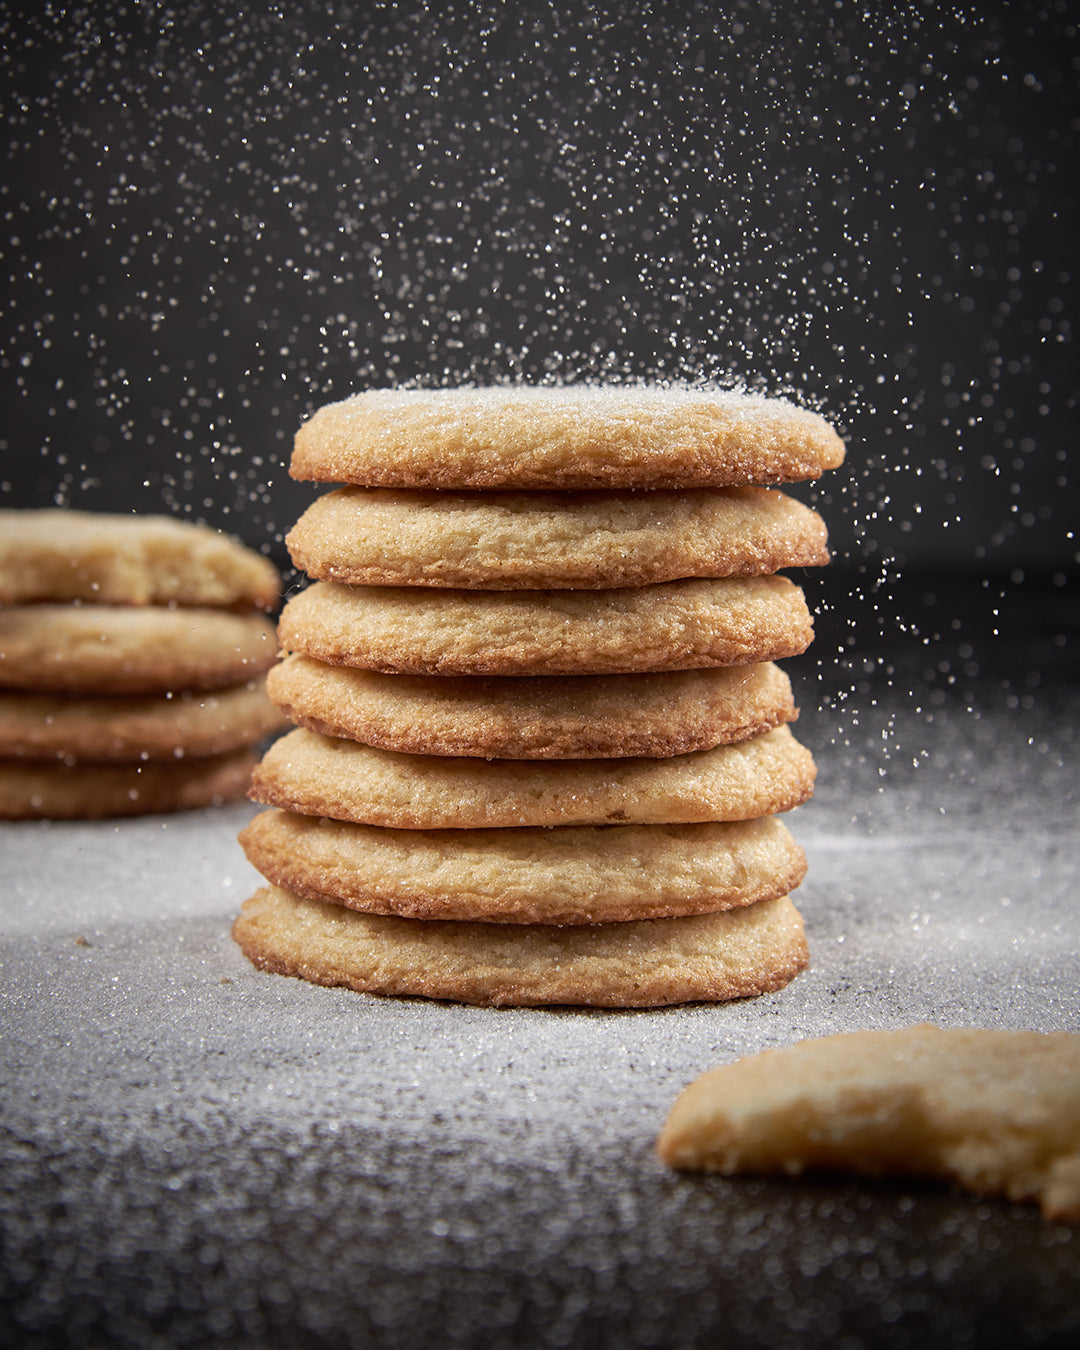 Don't make Sugar Cookies without reading this first